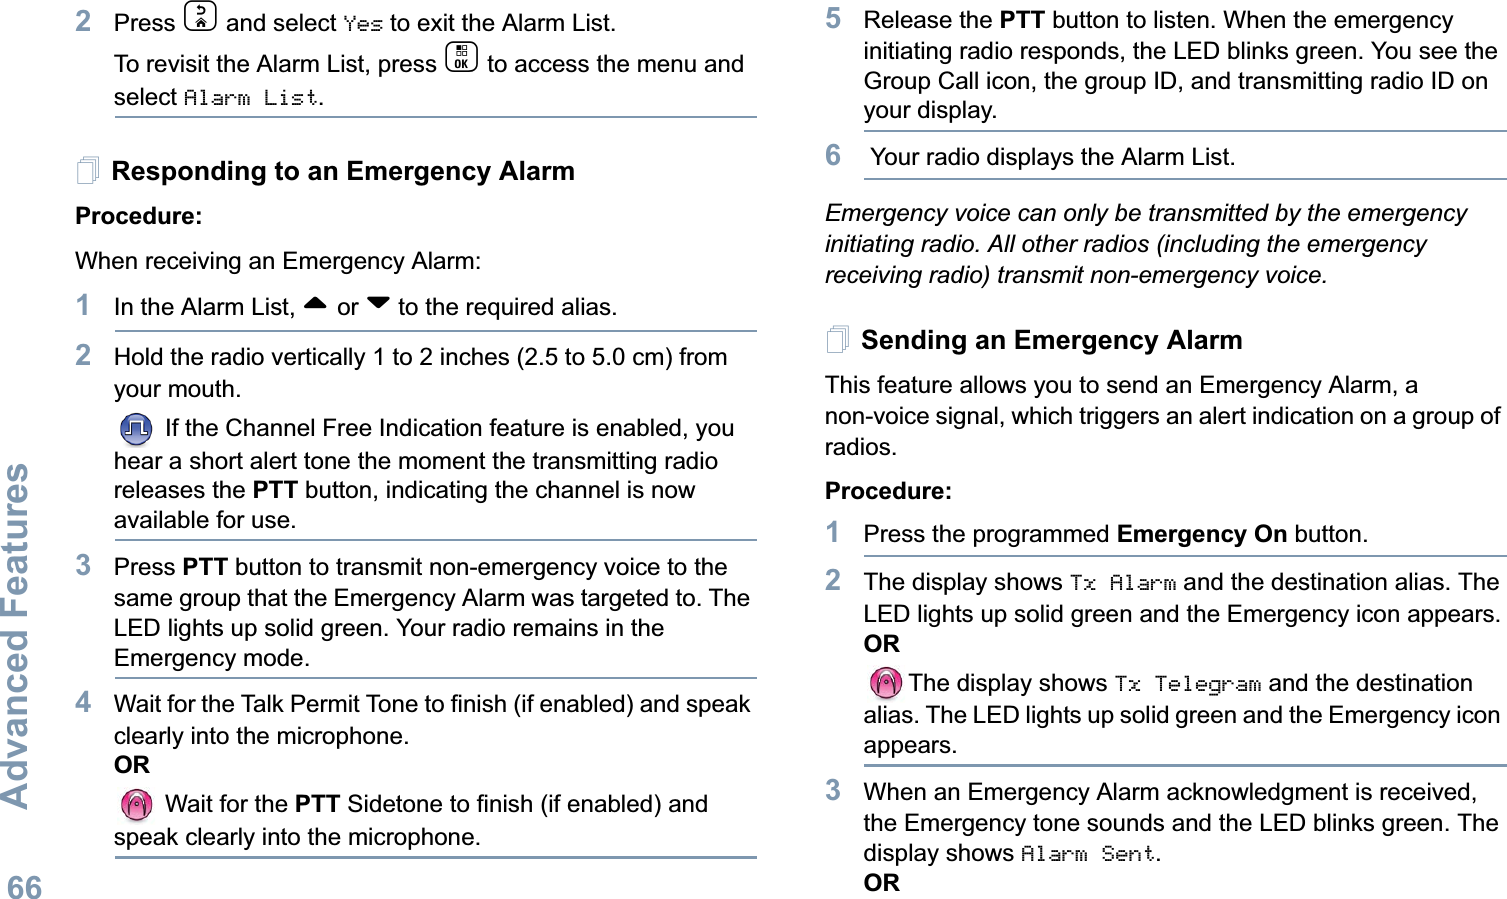 Advanced FeaturesEnglish662Press d and select Yes to exit the Alarm List. To revisit the Alarm List, press c to access the menu and select Alarm List. Responding to an Emergency AlarmProcedure:When receiving an Emergency Alarm:1In the Alarm List, ^ or v to the required alias. 2Hold the radio vertically 1 to 2 inches (2.5 to 5.0 cm) from your mouth. If the Channel Free Indication feature is enabled, you hear a short alert tone the moment the transmitting radio releases the PTT button, indicating the channel is now available for use.3Press PTT button to transmit non-emergency voice to the same group that the Emergency Alarm was targeted to. The LED lights up solid green. Your radio remains in the Emergency mode.4Wait for the Talk Permit Tone to finish (if enabled) and speak clearly into the microphone.OR Wait for the PTT Sidetone to finish (if enabled) and speak clearly into the microphone.5Release the PTT button to listen. When the emergency initiating radio responds, the LED blinks green. You see the Group Call icon, the group ID, and transmitting radio ID on your display.6 Your radio displays the Alarm List. Emergency voice can only be transmitted by the emergency initiating radio. All other radios (including the emergency receiving radio) transmit non-emergency voice.Sending an Emergency AlarmThis feature allows you to send an Emergency Alarm, a non-voice signal, which triggers an alert indication on a group of radios. Procedure: 1Press the programmed Emergency On button.2The display shows Tx Alarm and the destination alias. The LED lights up solid green and the Emergency icon appears.ORThe display shows Tx Telegram and the destination alias. The LED lights up solid green and the Emergency icon appears.3When an Emergency Alarm acknowledgment is received, the Emergency tone sounds and the LED blinks green. The display shows Alarm Sent.OR